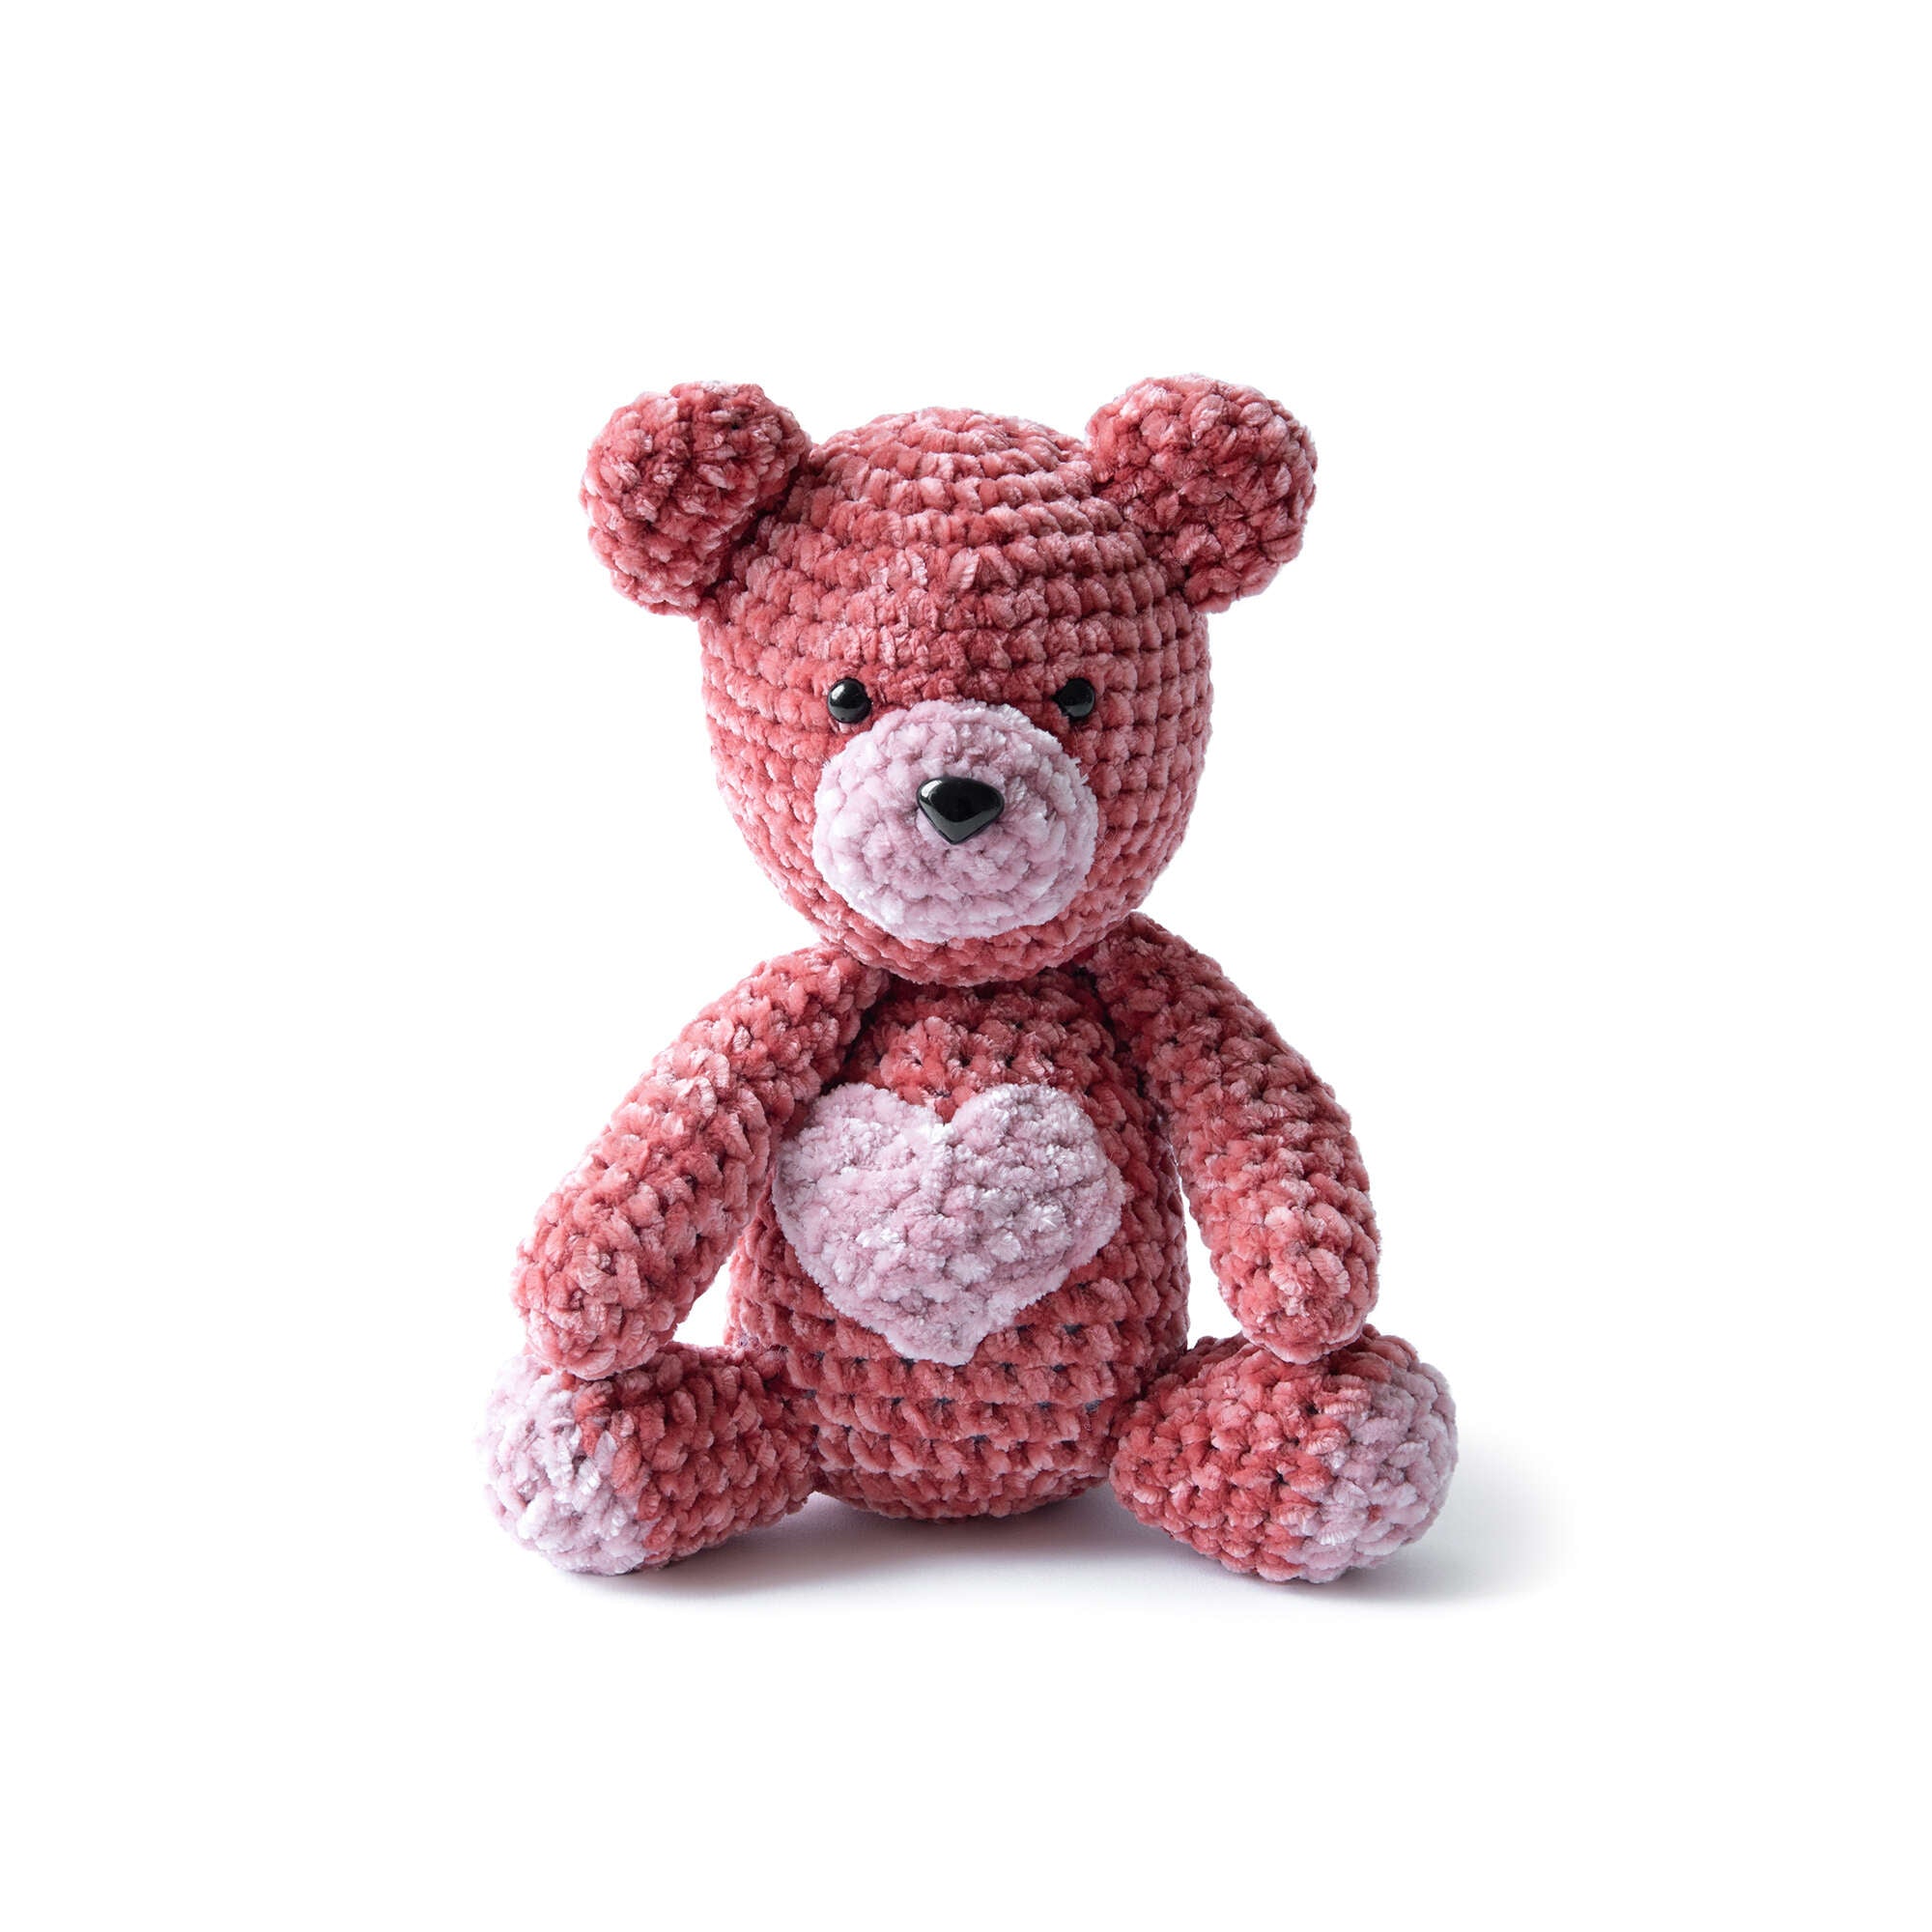 Wholesale Handmade Crochet Animals for Sale Toys And Teddies Online 